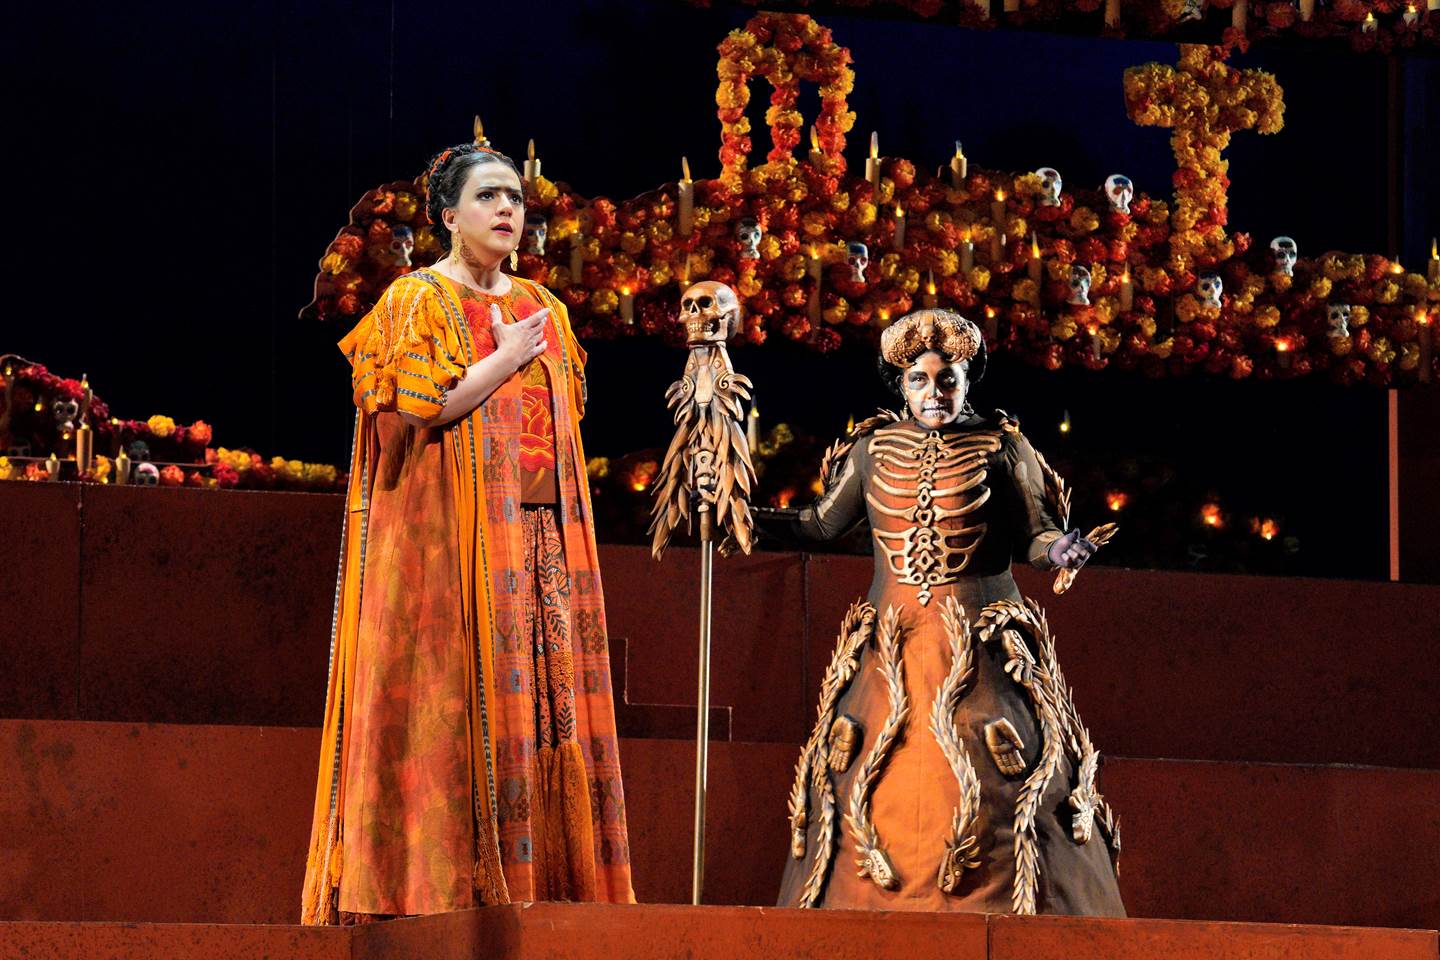 Scene from Frida Two women in costumes standing on a stage in front of skeletons.